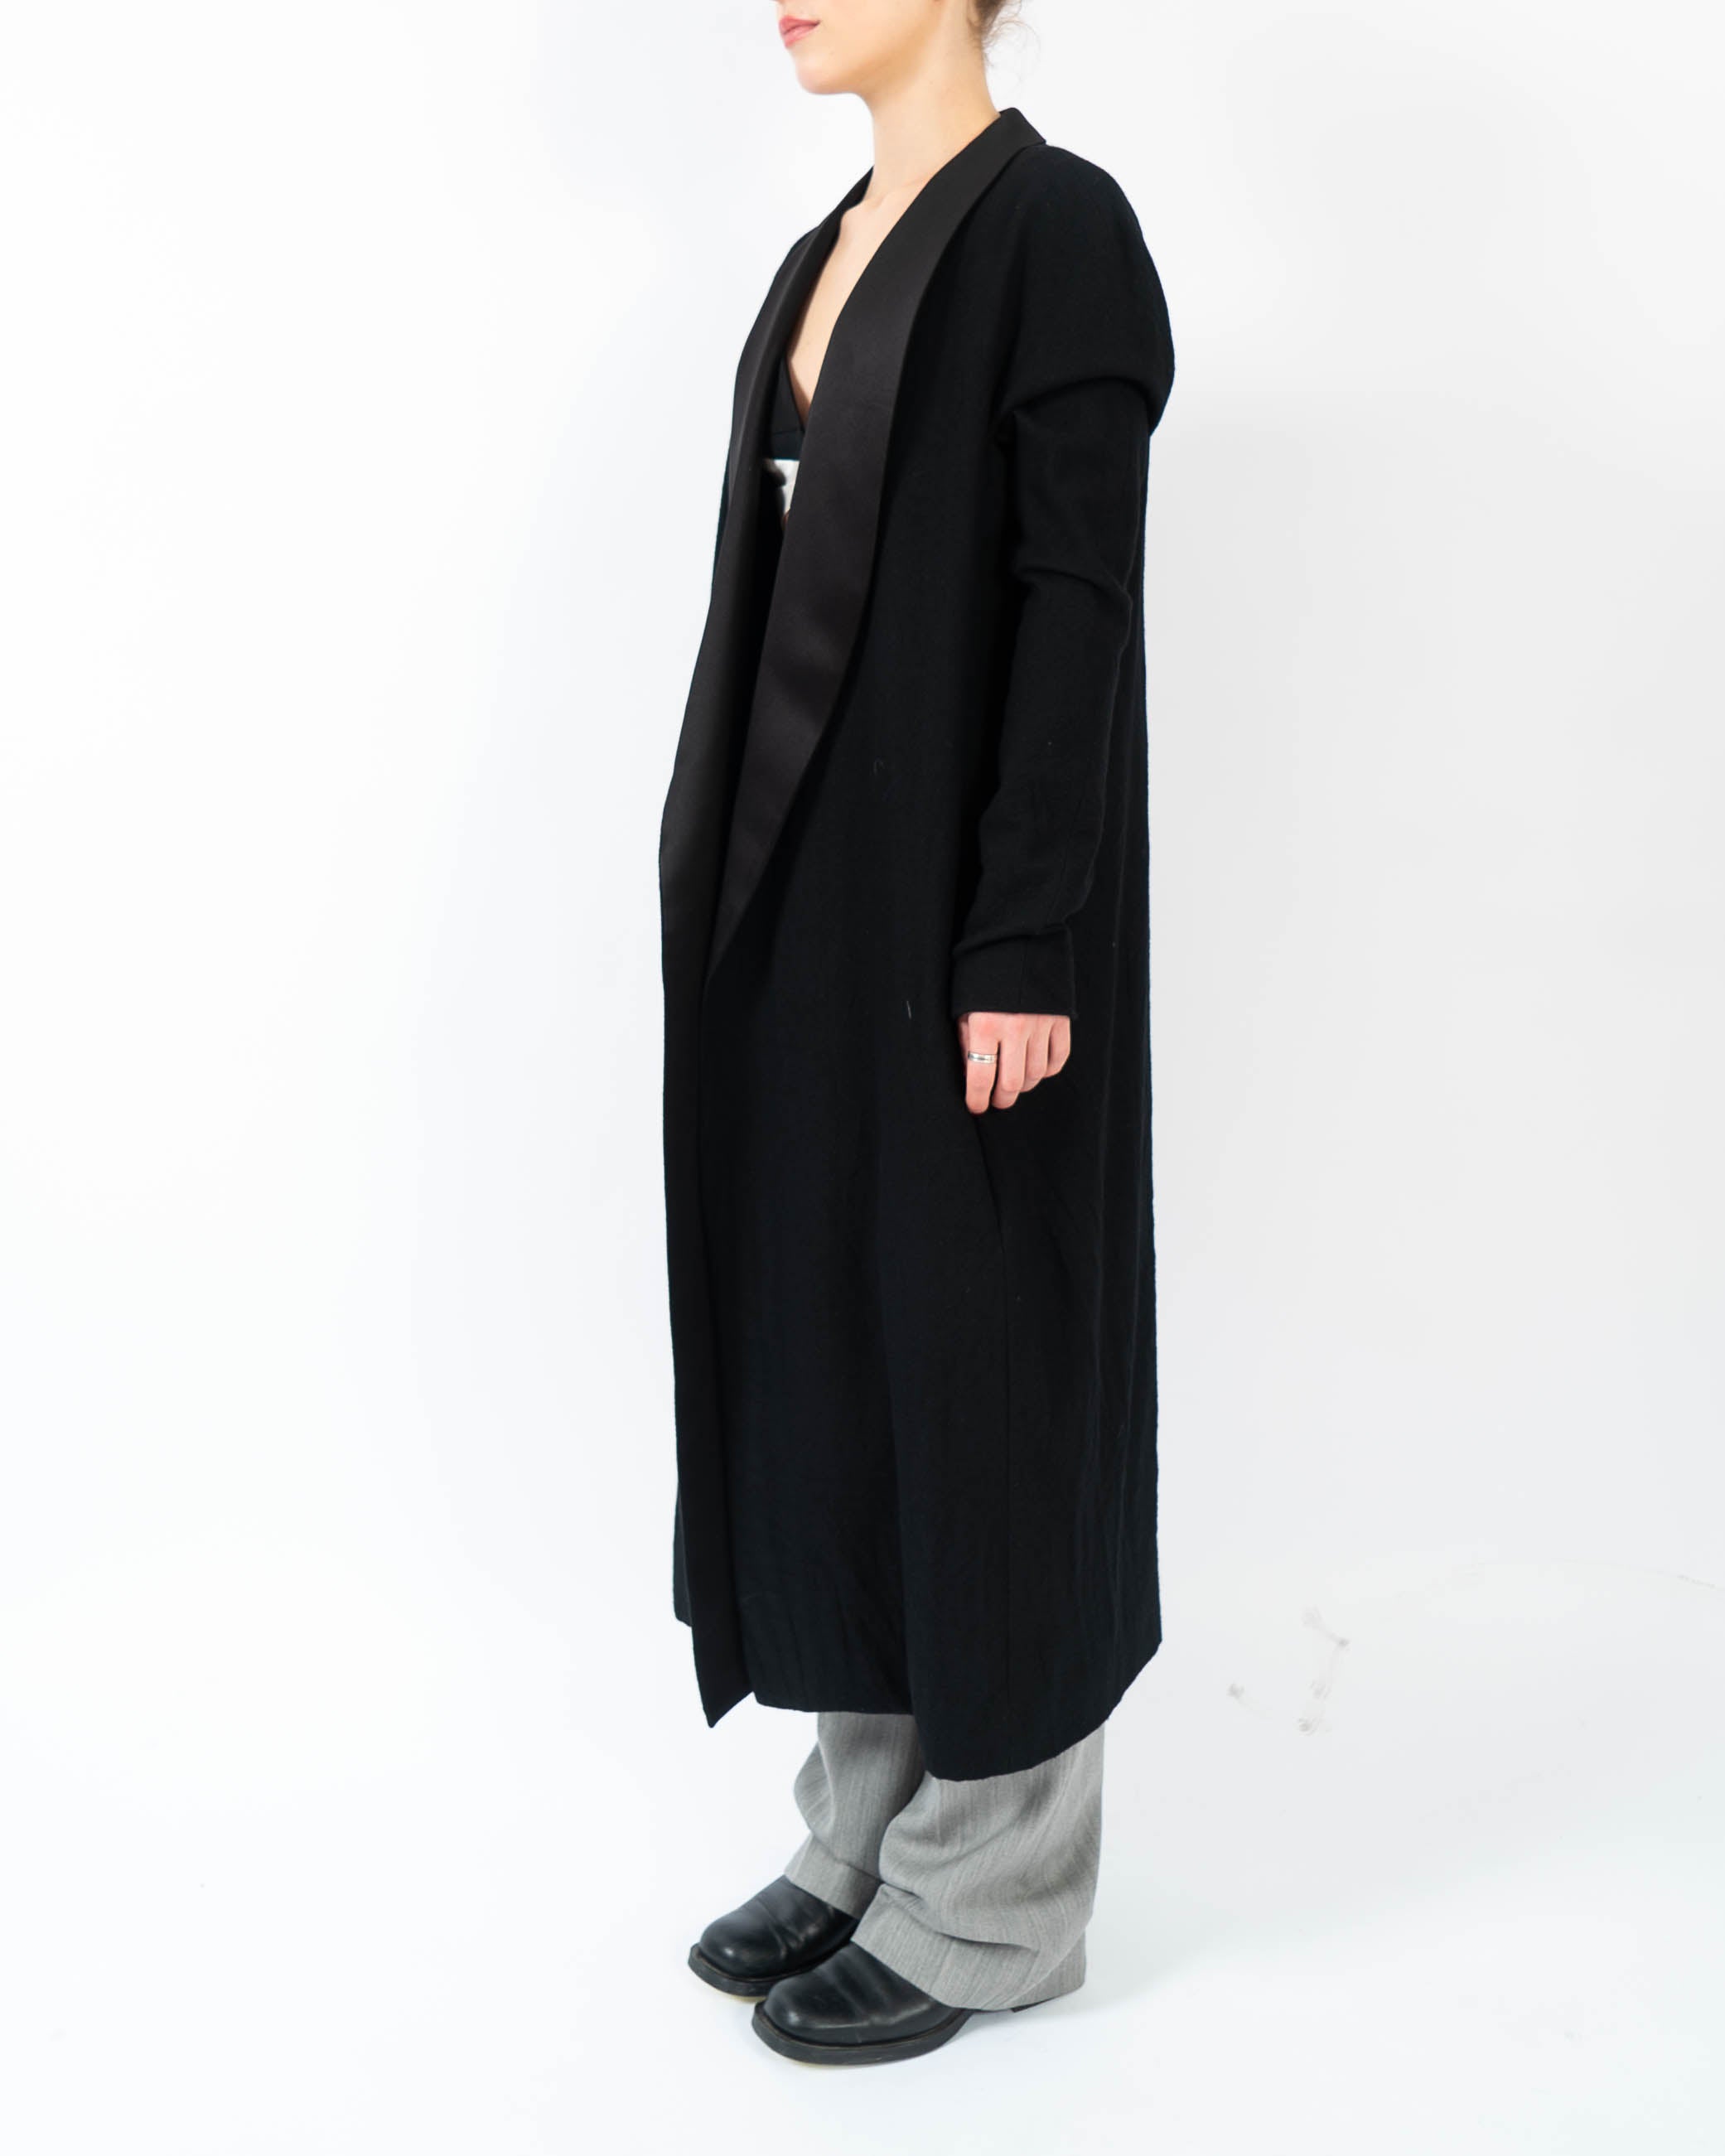 FW11 Black Unstructured Longcoat in Black Wool with Satin Shawl Collar